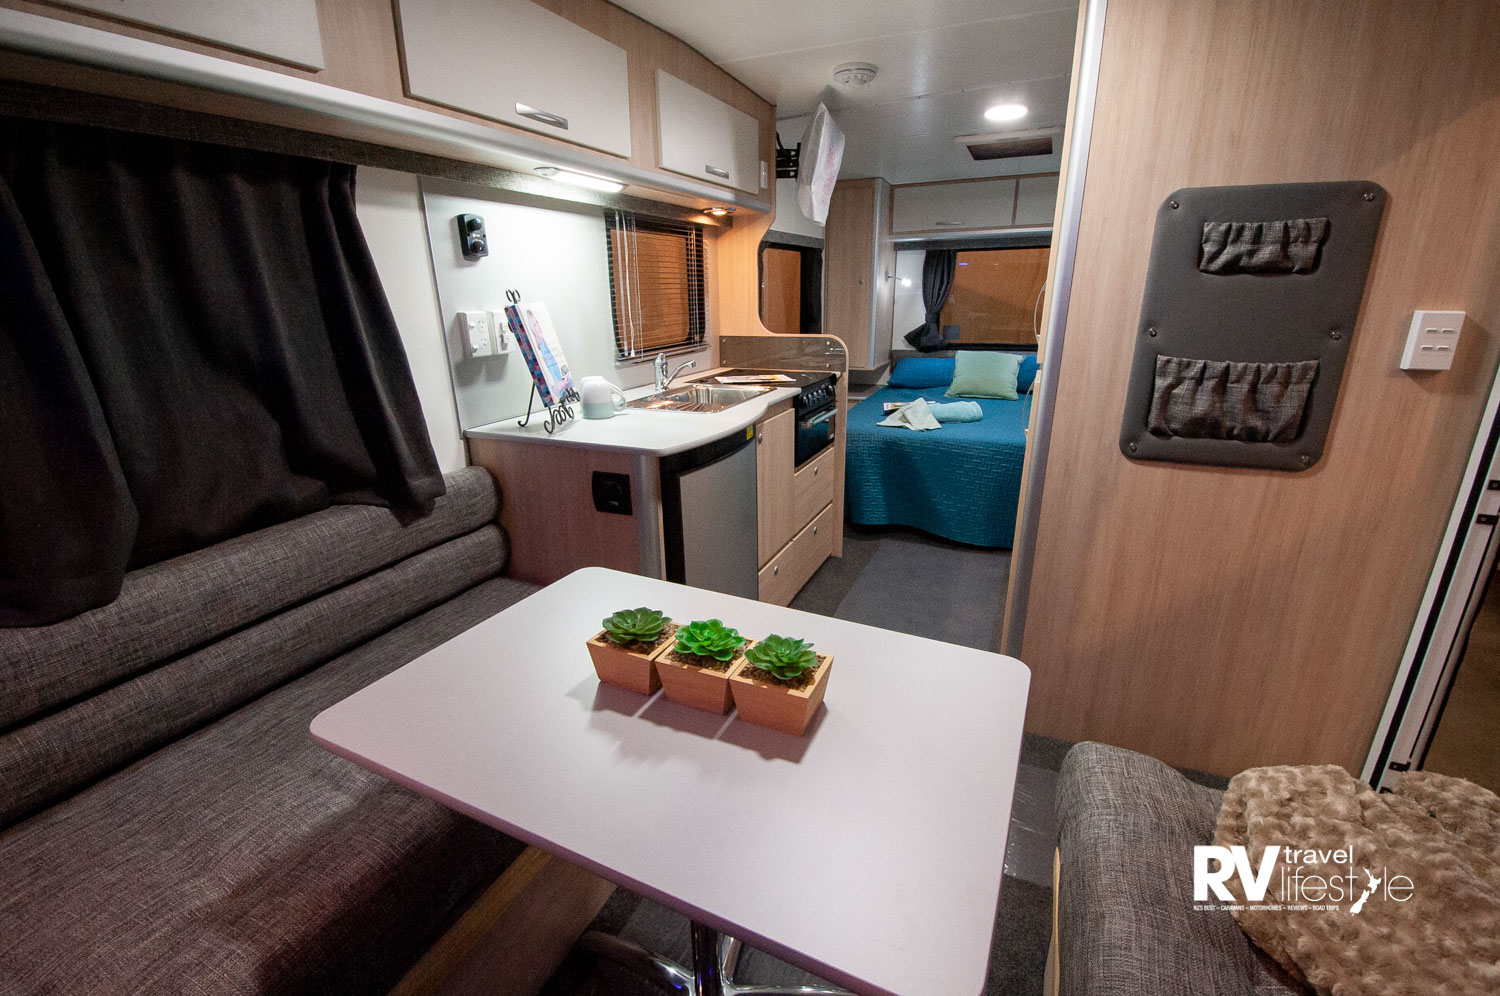 The lounge area can be made up into a large second bed. Heating vents are well placed, quality foam squabs and fabrics make for a comfortable seating area, colours can be chosen by clients to personalise your caravan